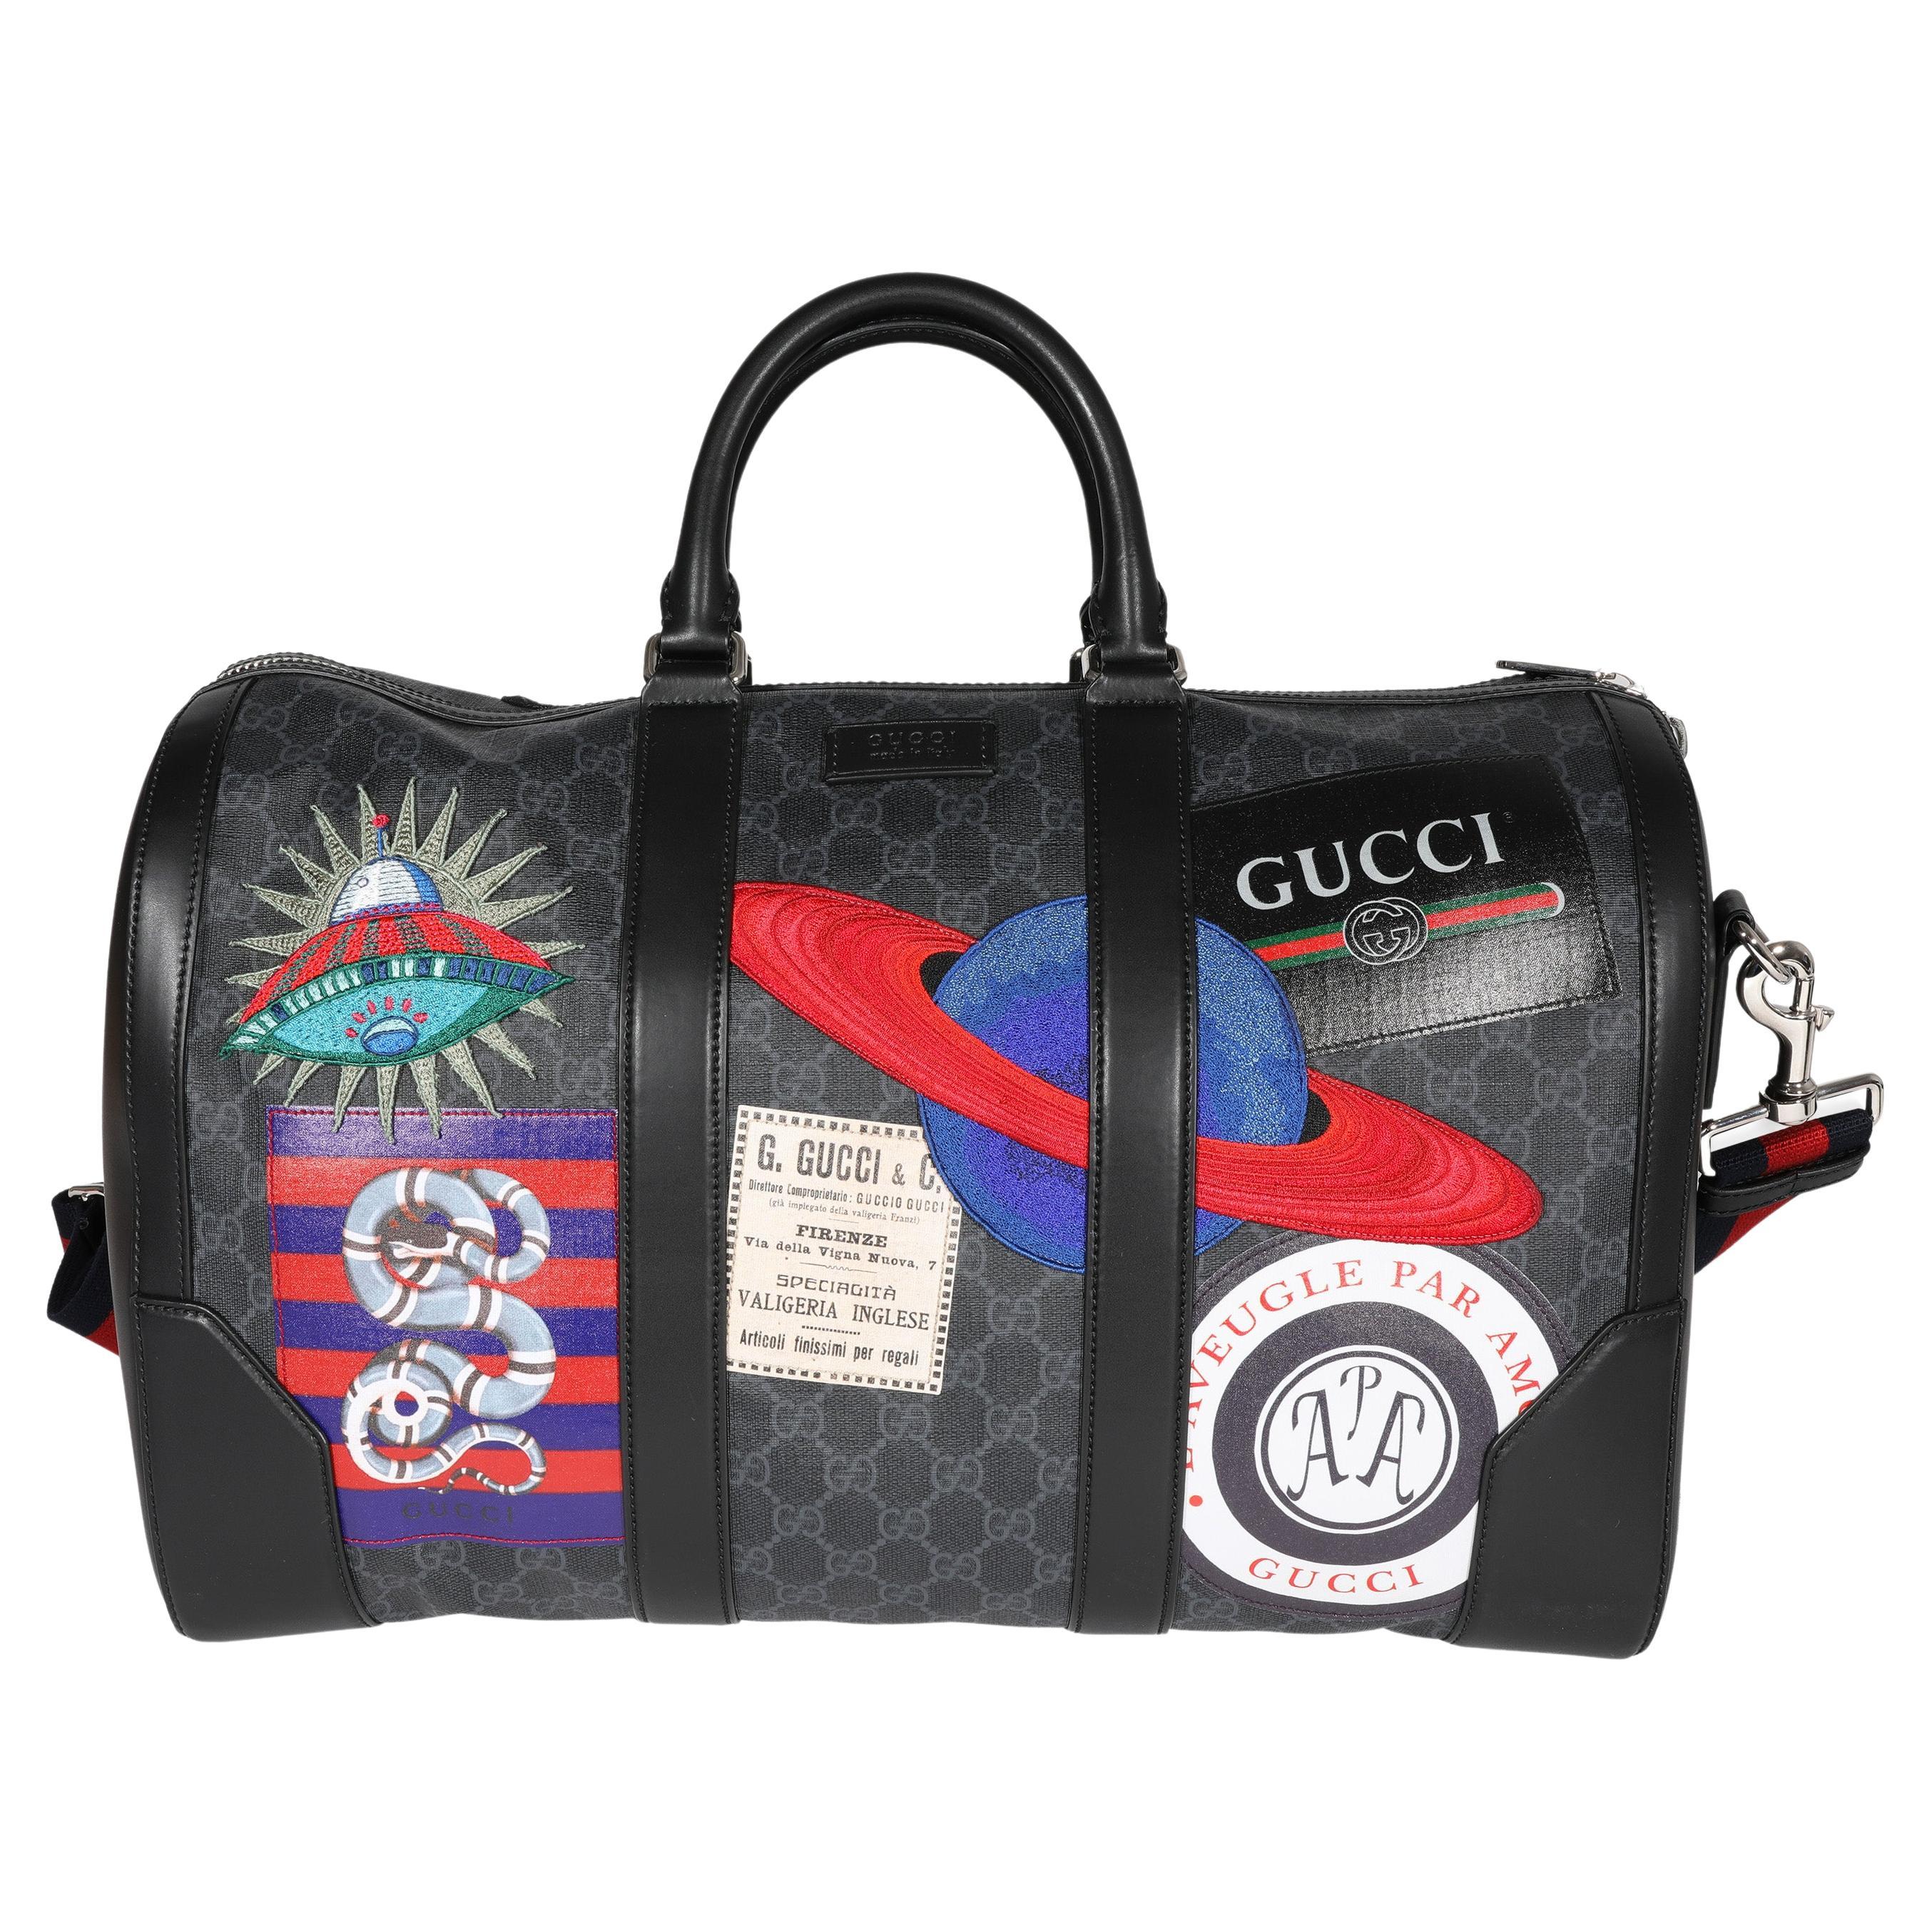 Gucci Black GG Supreme Canvas Night Courrier Carry-On-Duffle